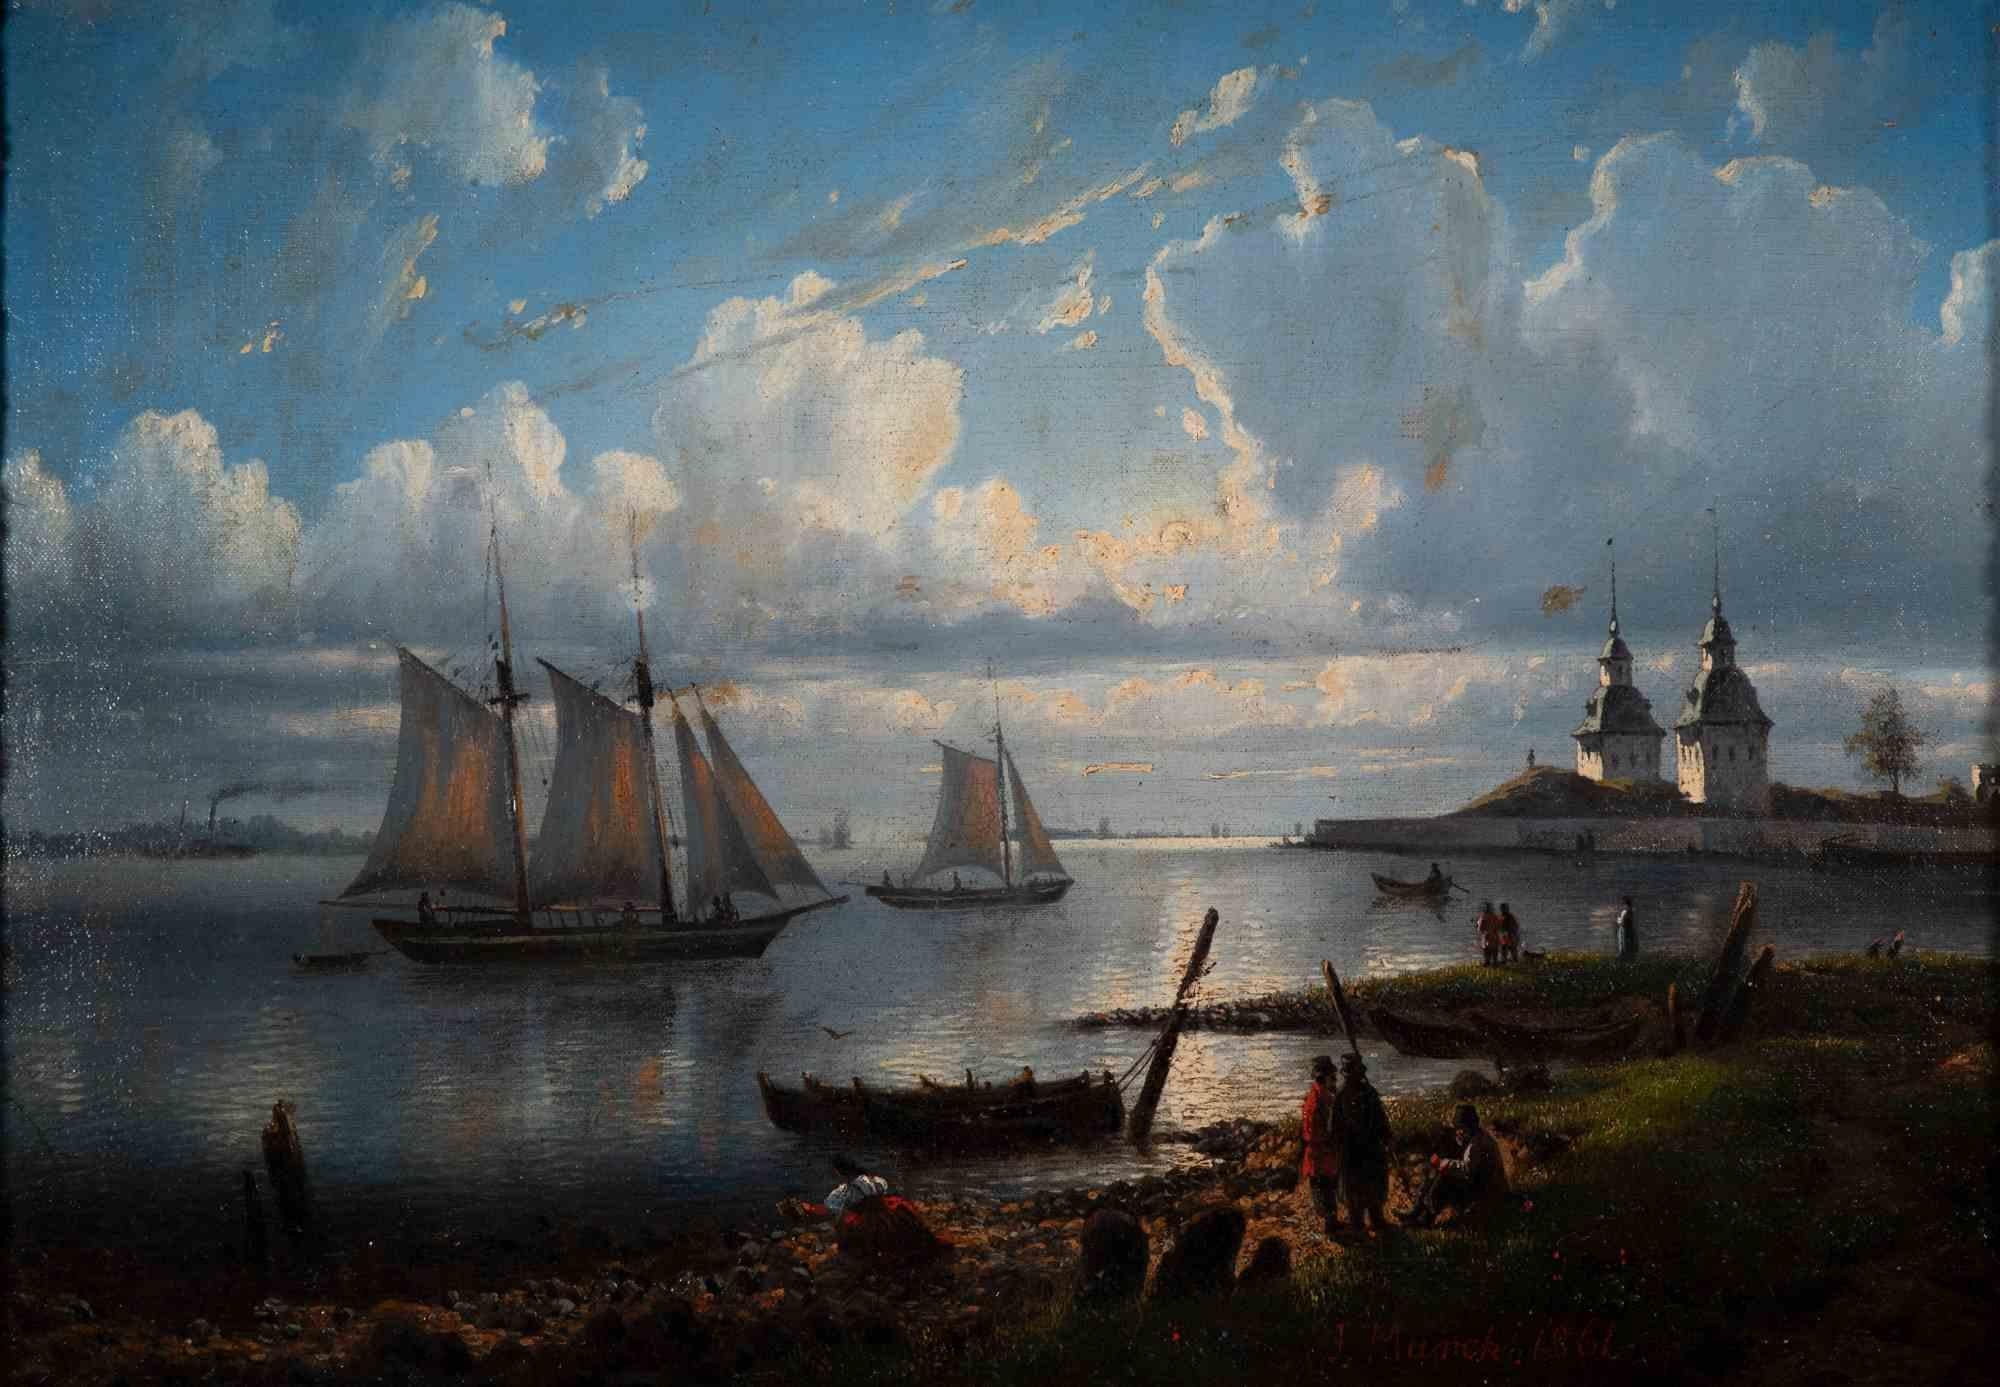 Sunrise Landscape with Boats - Oil Painting Russian School  - 1861